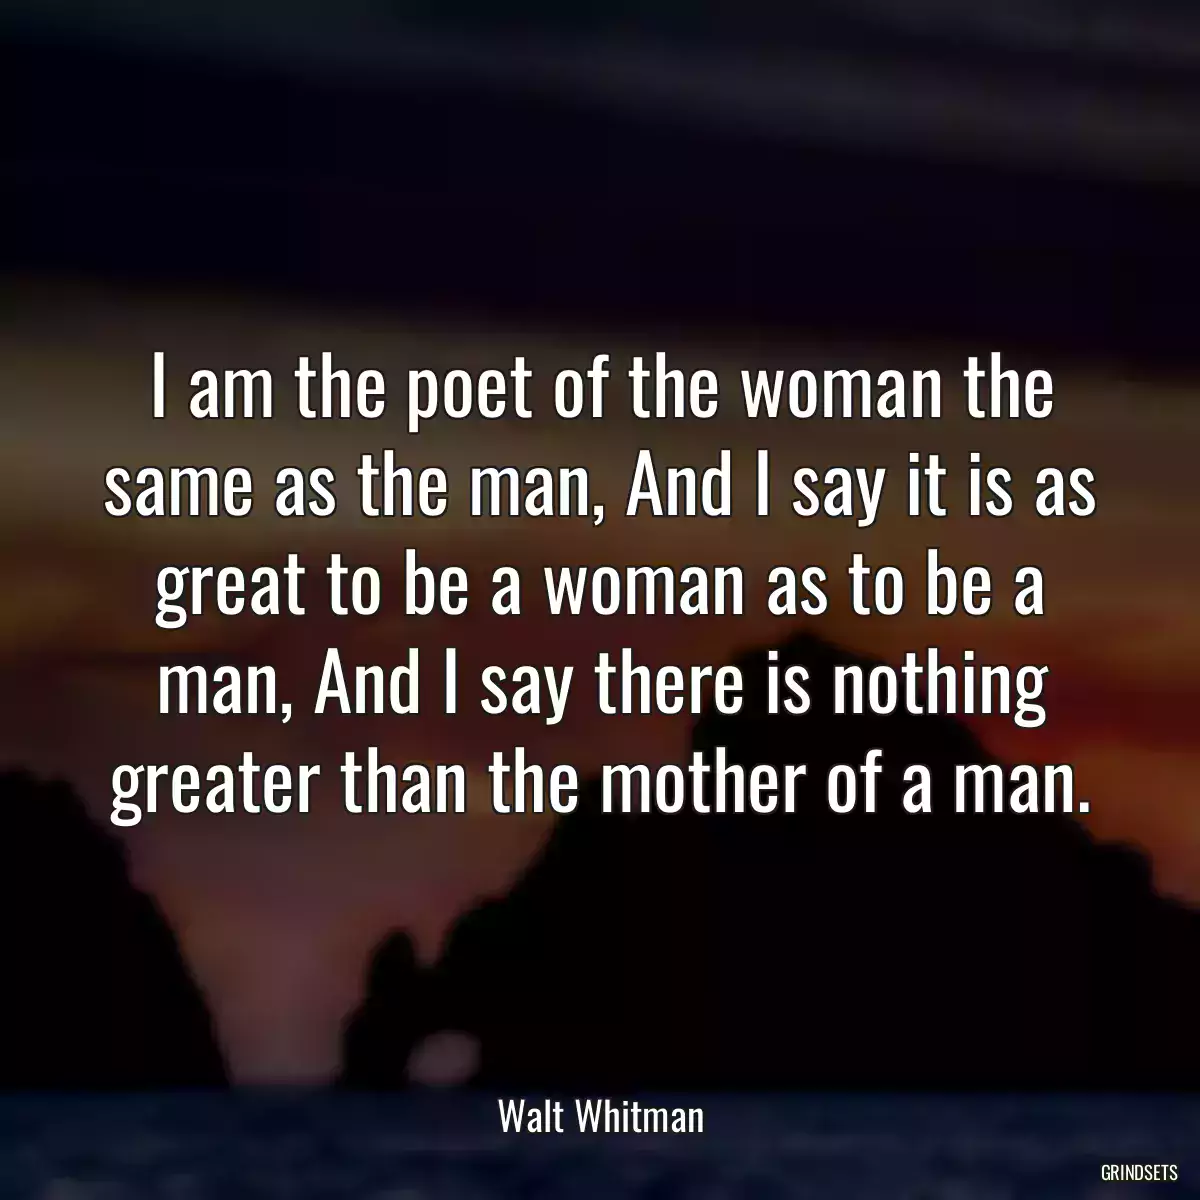 I am the poet of the woman the same as the man, And I say it is as great to be a woman as to be a man, And I say there is nothing greater than the mother of a man.